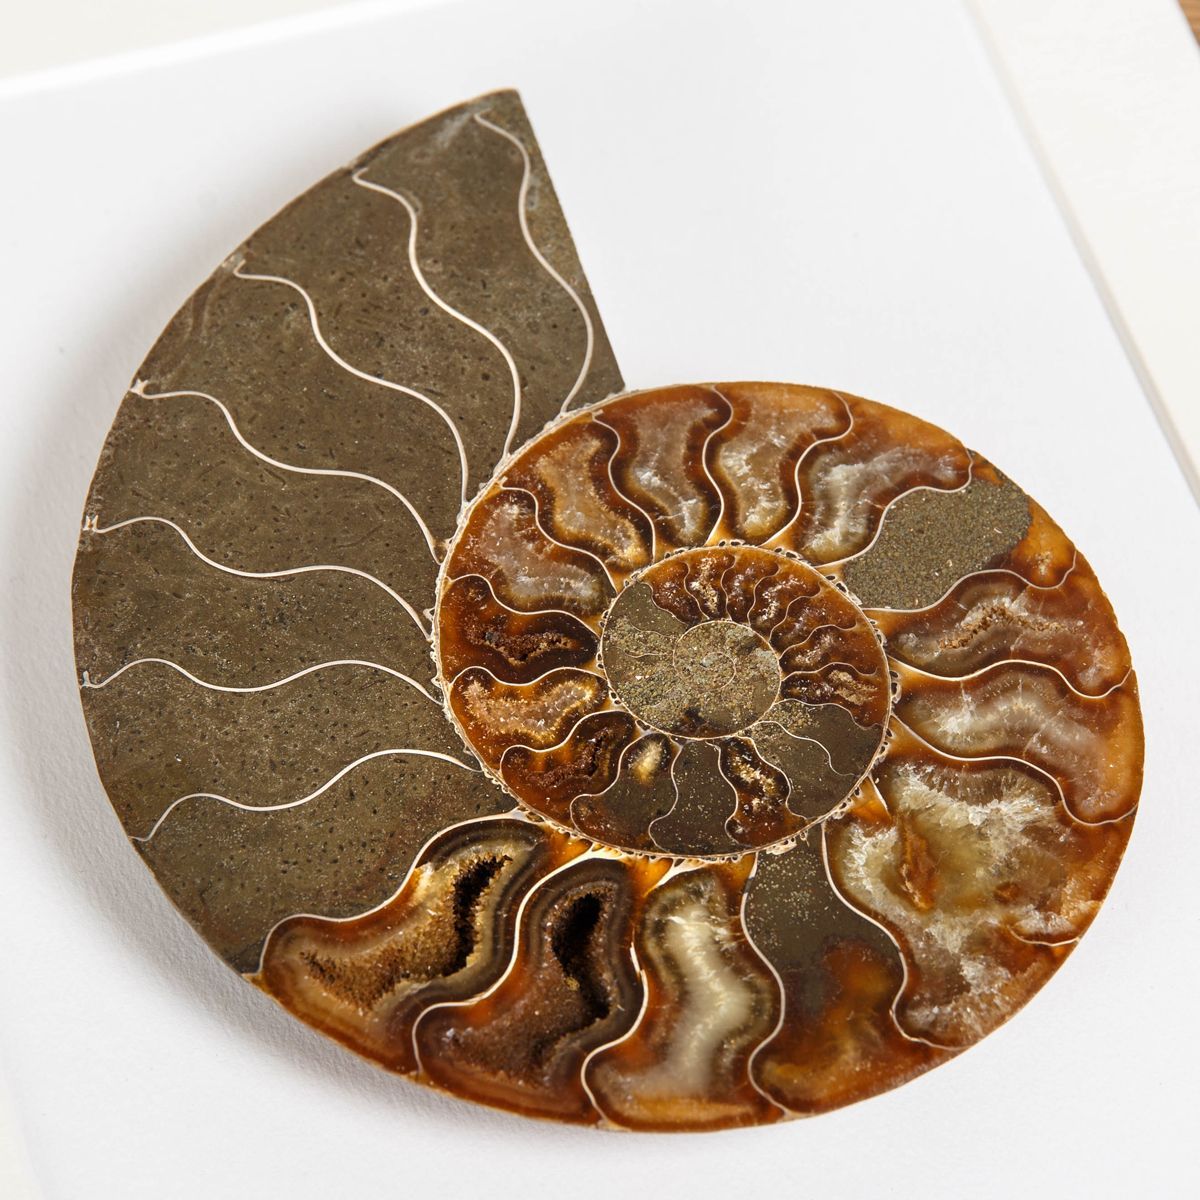 Cut and Polished Ammonite Fossil in Box Frame (Cleoniceras sp) 10 x 8